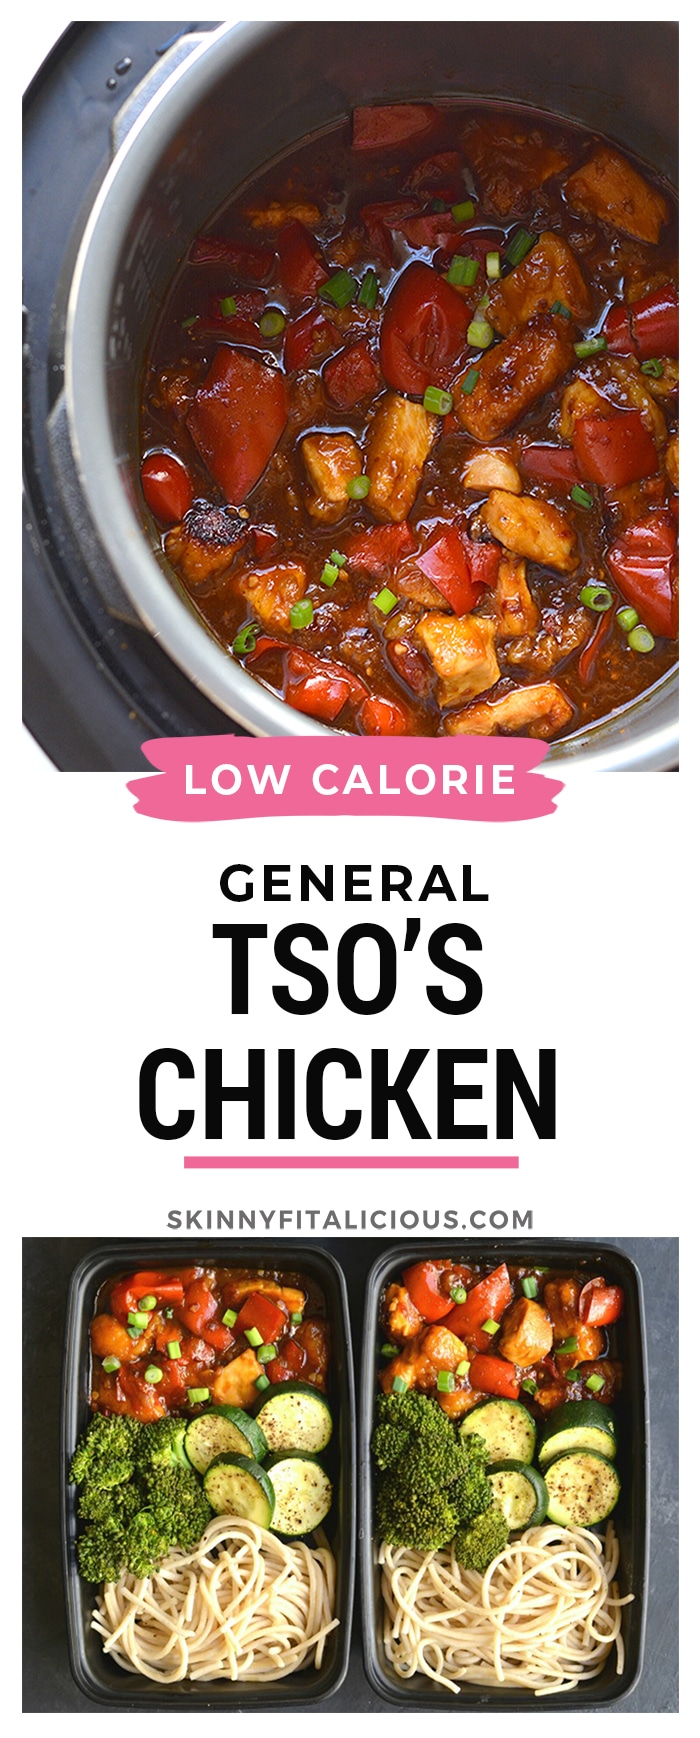 Meal Prep General TSO's Chicken! This version is made easy in the Instant Pot or on the stovetop. Topped with a healthier, starch-free sauce that's delicious and packed with wholesome ingredients. Serve with brown rice pasta for a lighter, healthier homemade version of your favorite takeout! Gluten Free + Low Calorie